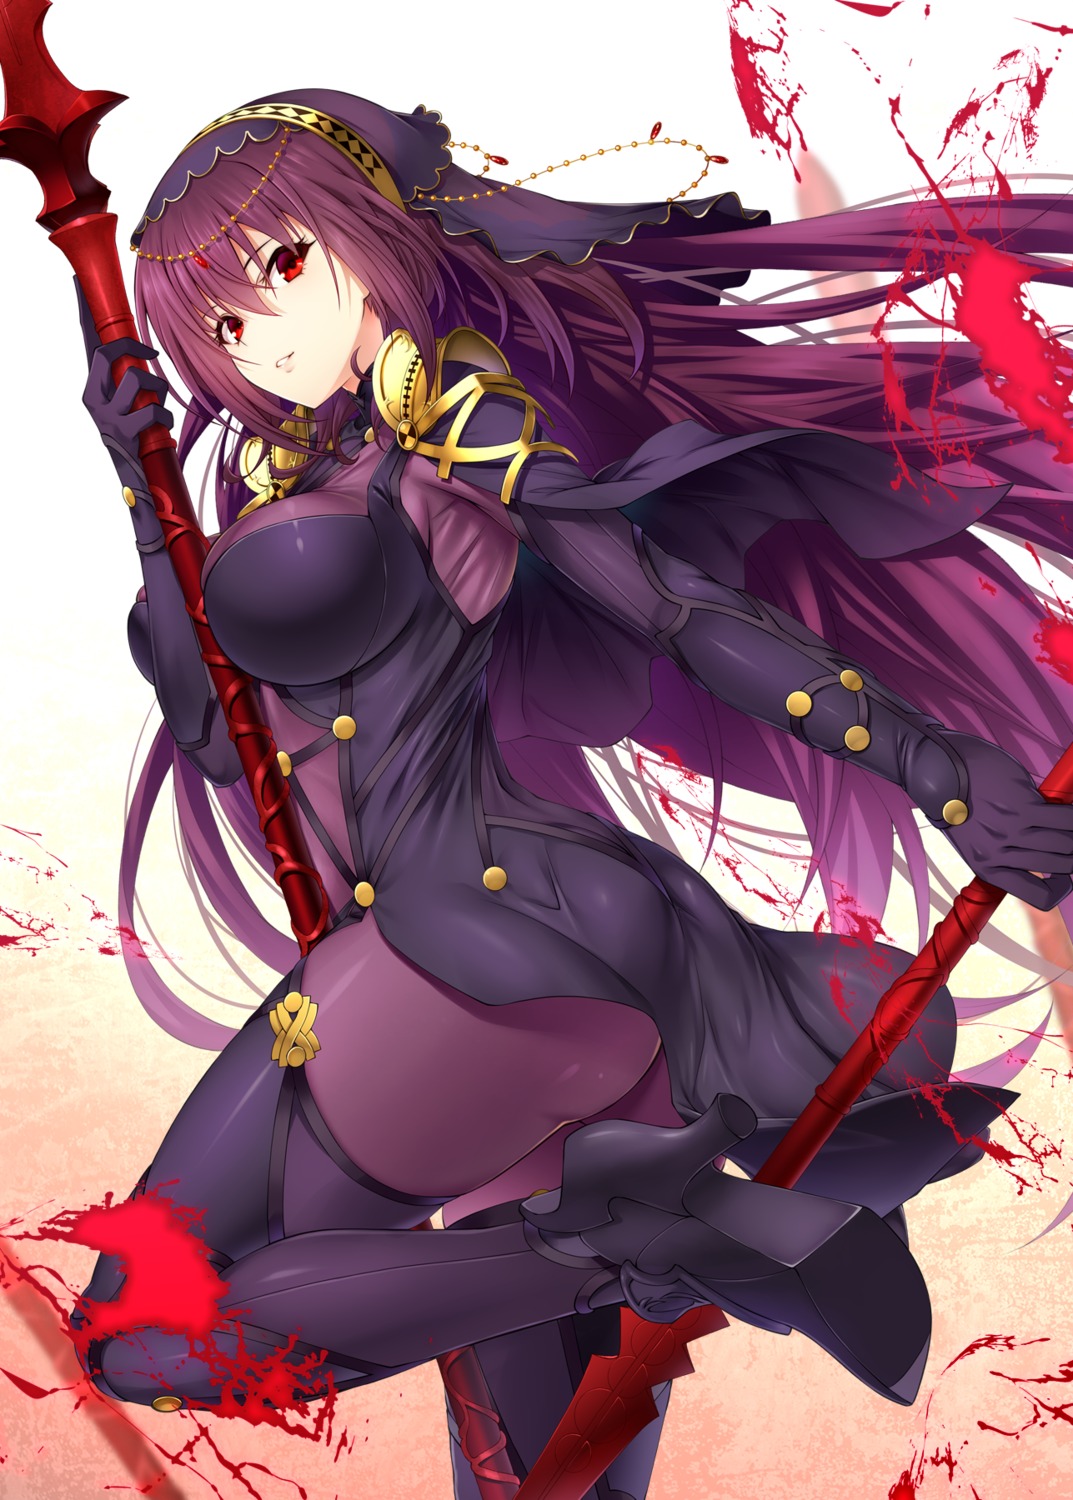 armor ass bodysuit emanon_123 fate/grand_order heels scathach_(fate/grand_order) skirt_lift weapon